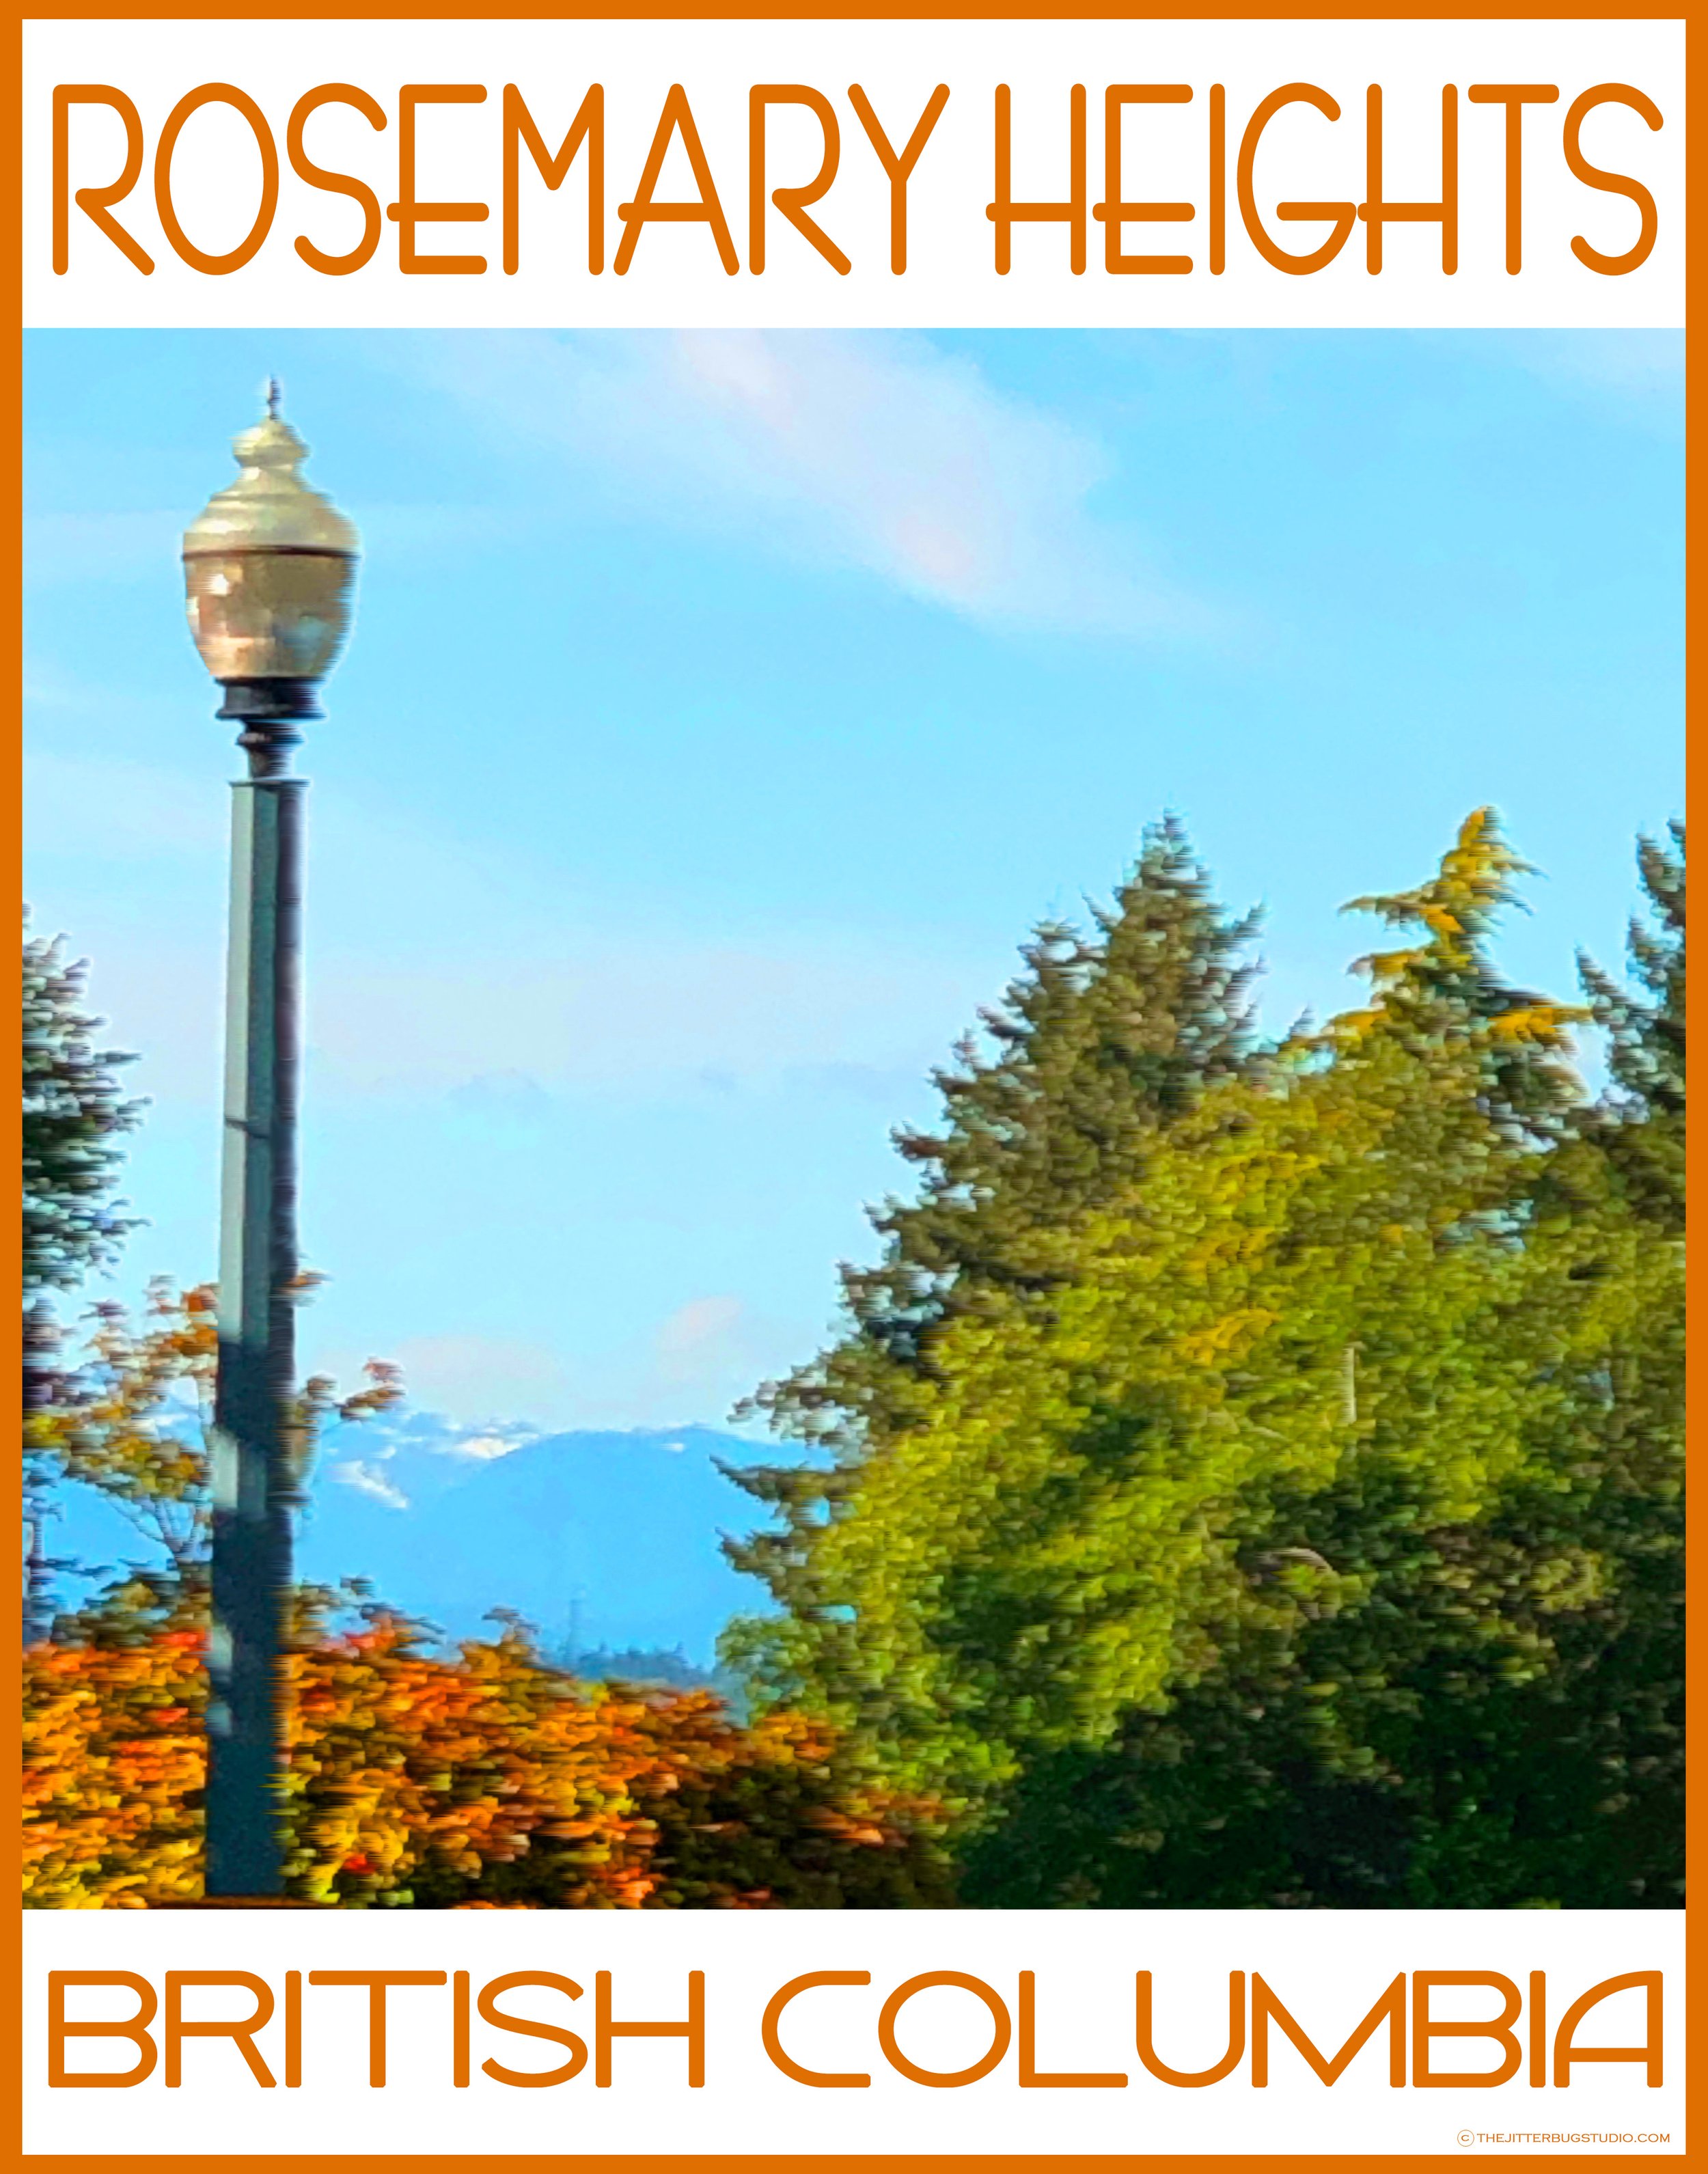 ROSEMARY HEIGHTS POSTER copy.jpg